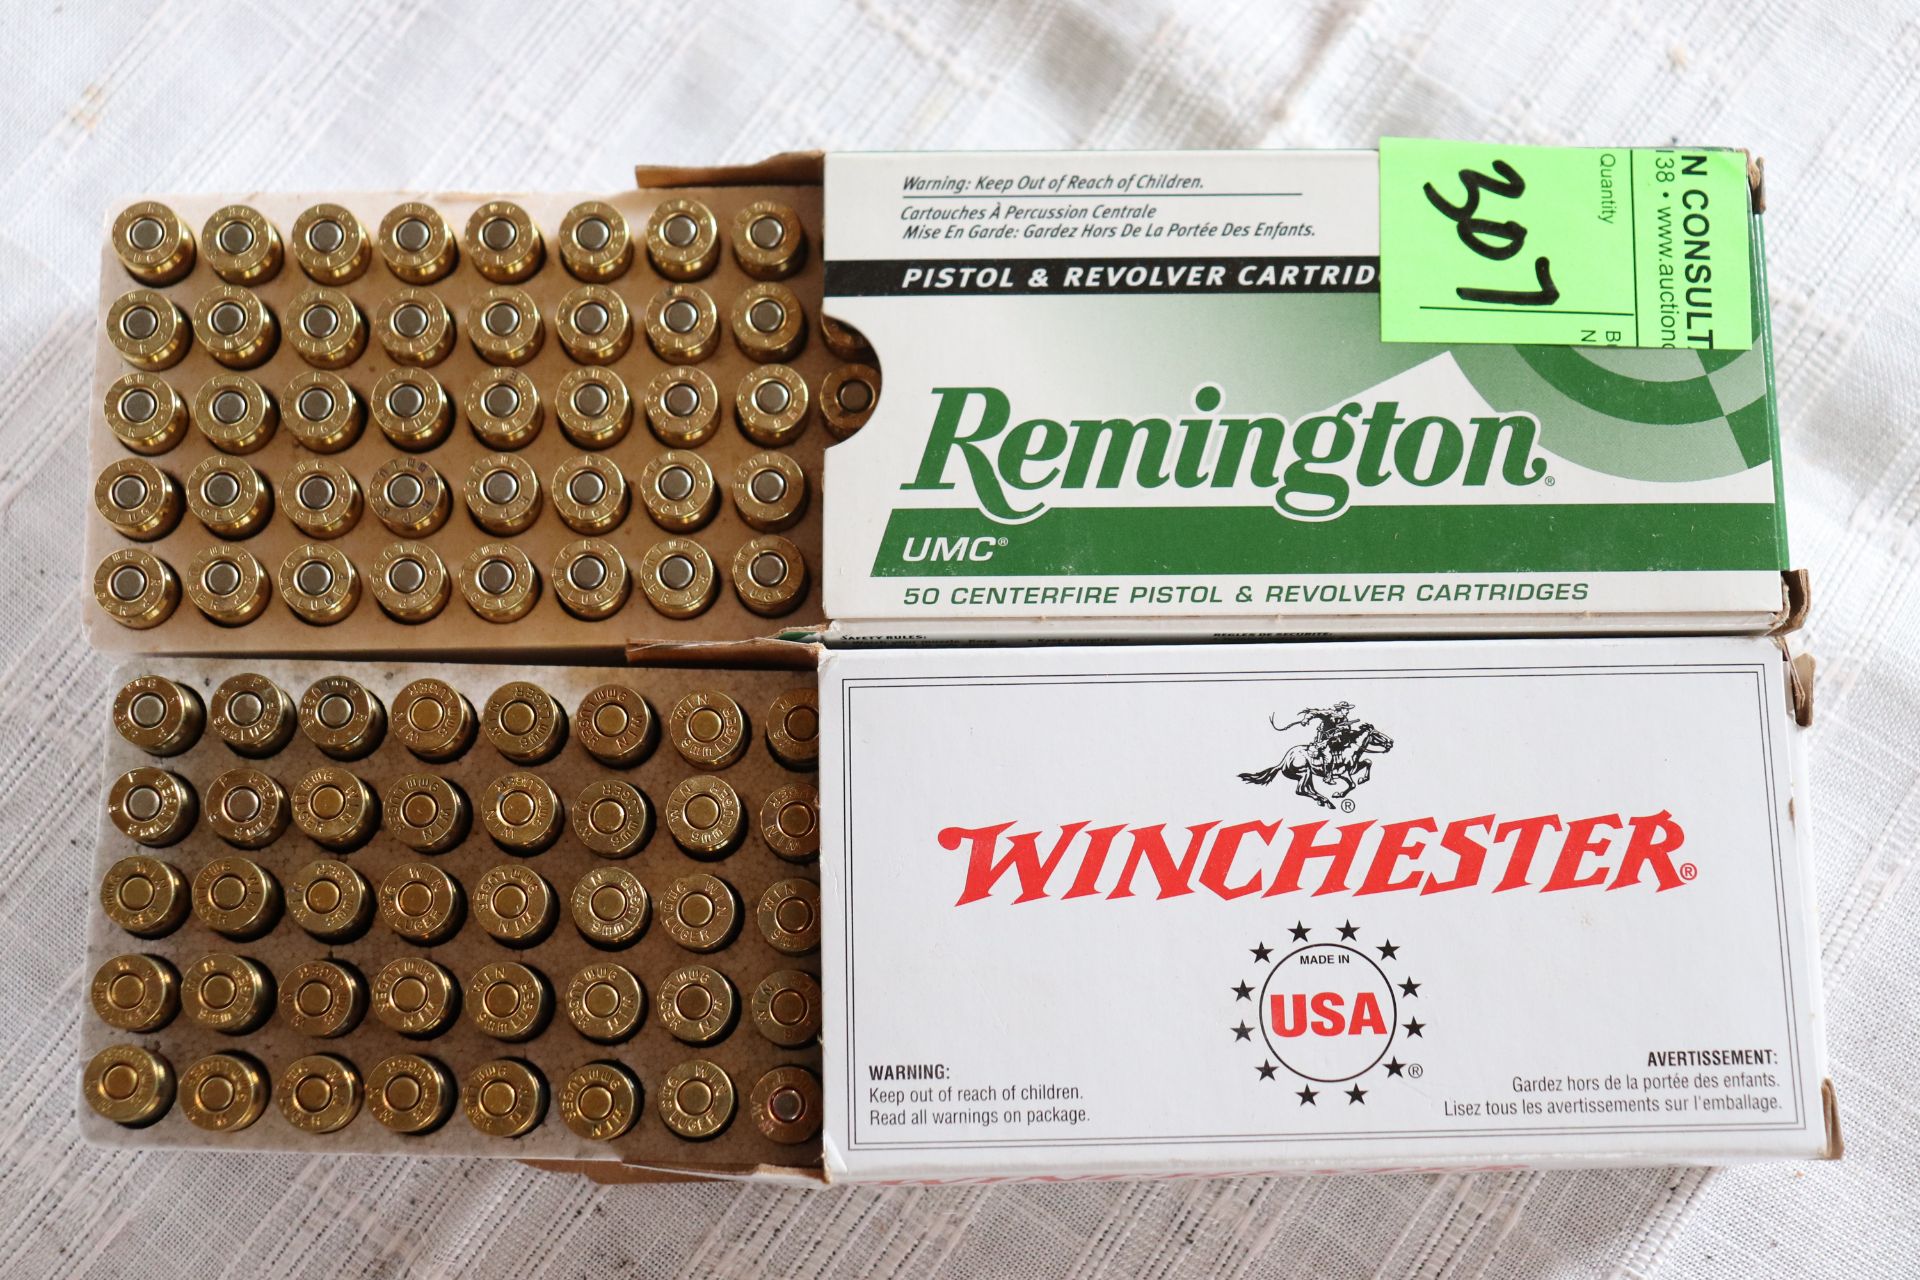 9mm Luger 115 grain 100 rounds by Remington and Winchester, All State and Federal Firearms License w